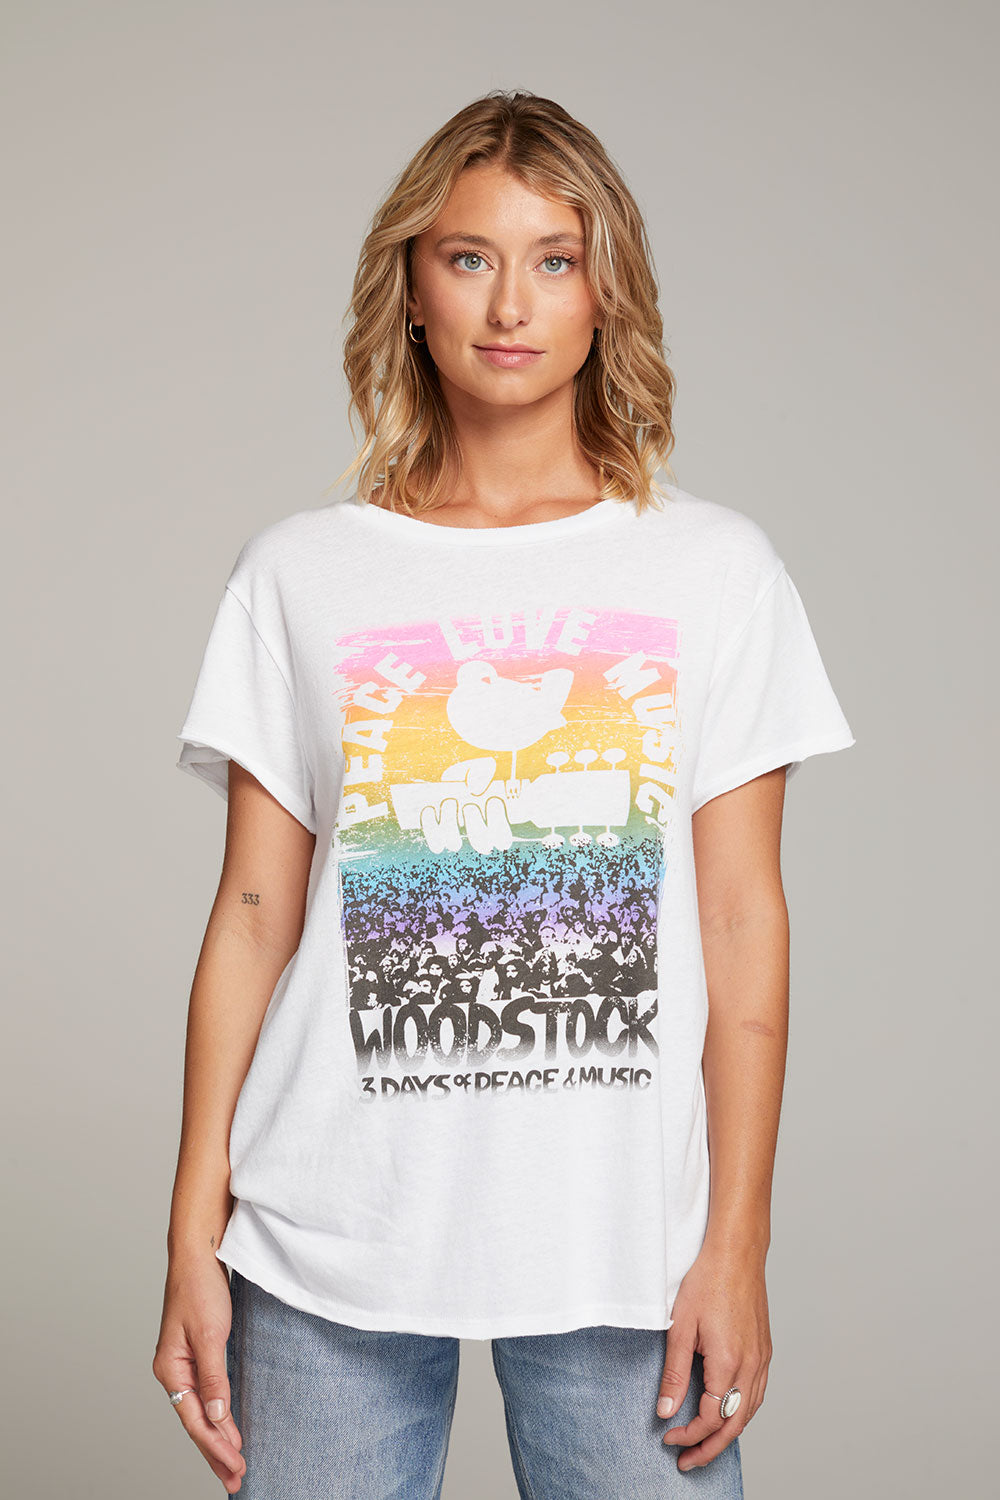 Woodstock Peace Love Music Tee WOMENS chaserbrand